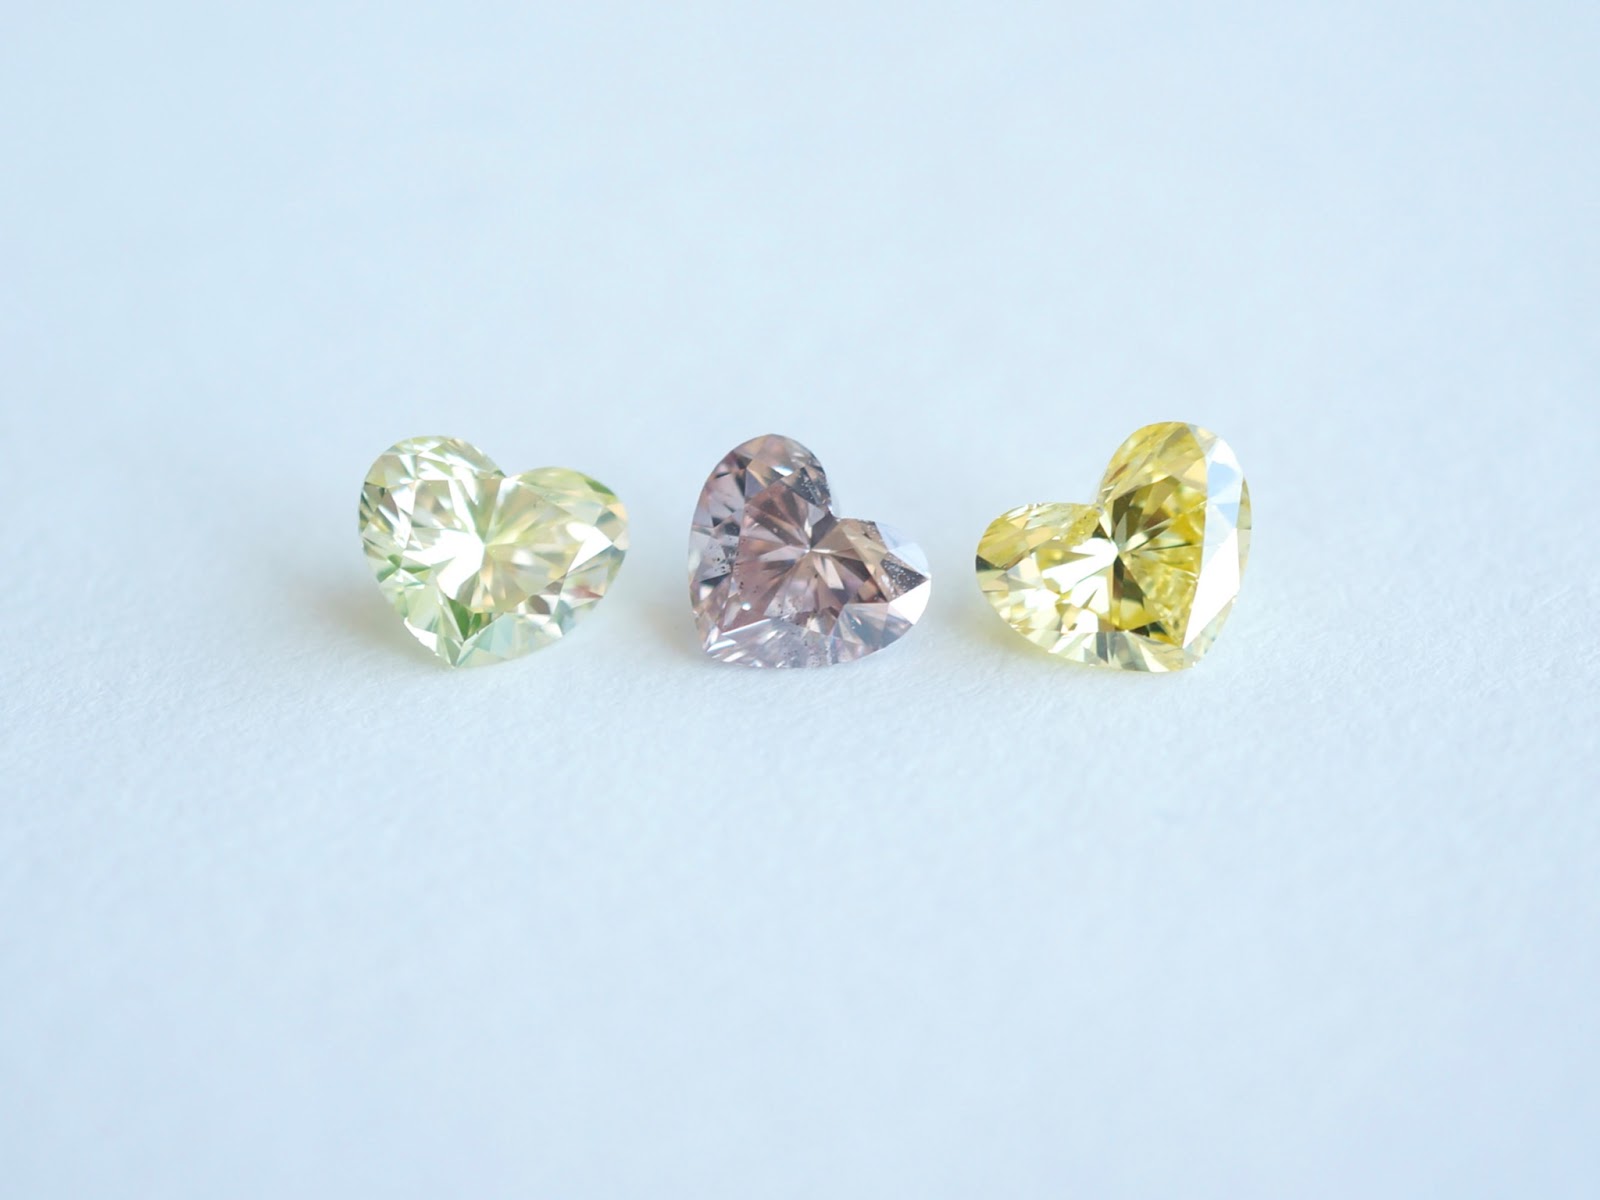 Natural Mint, Lavender, and Canary color diamonds from Langerman Diamonds